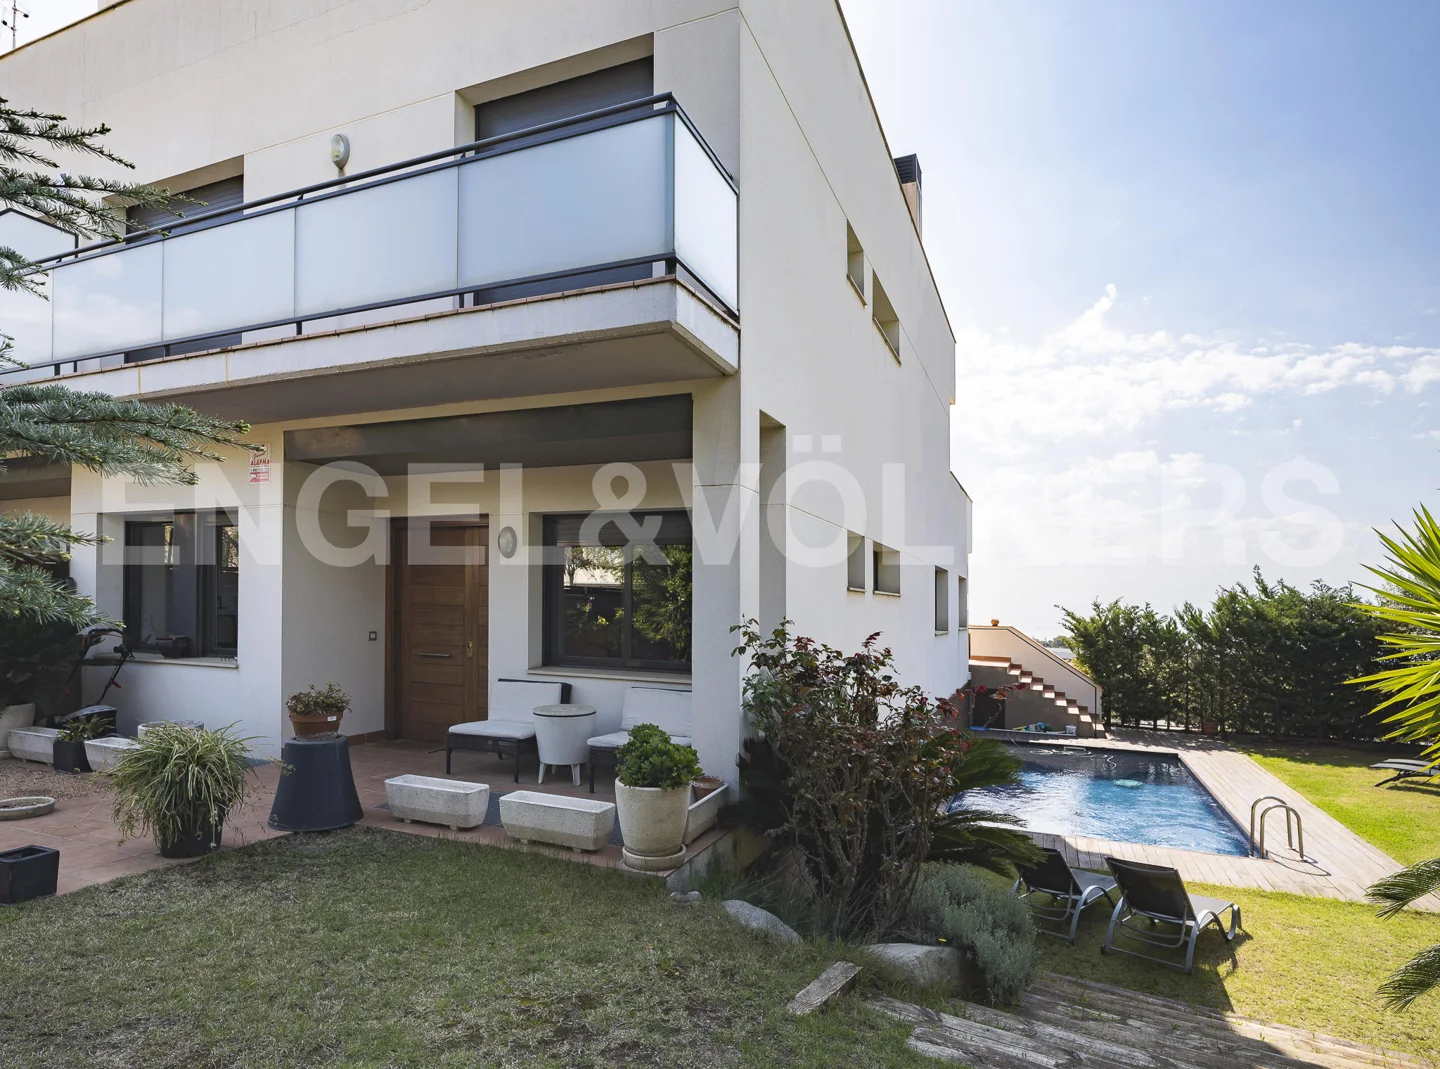 Villa with three winds in Mataró with sea views